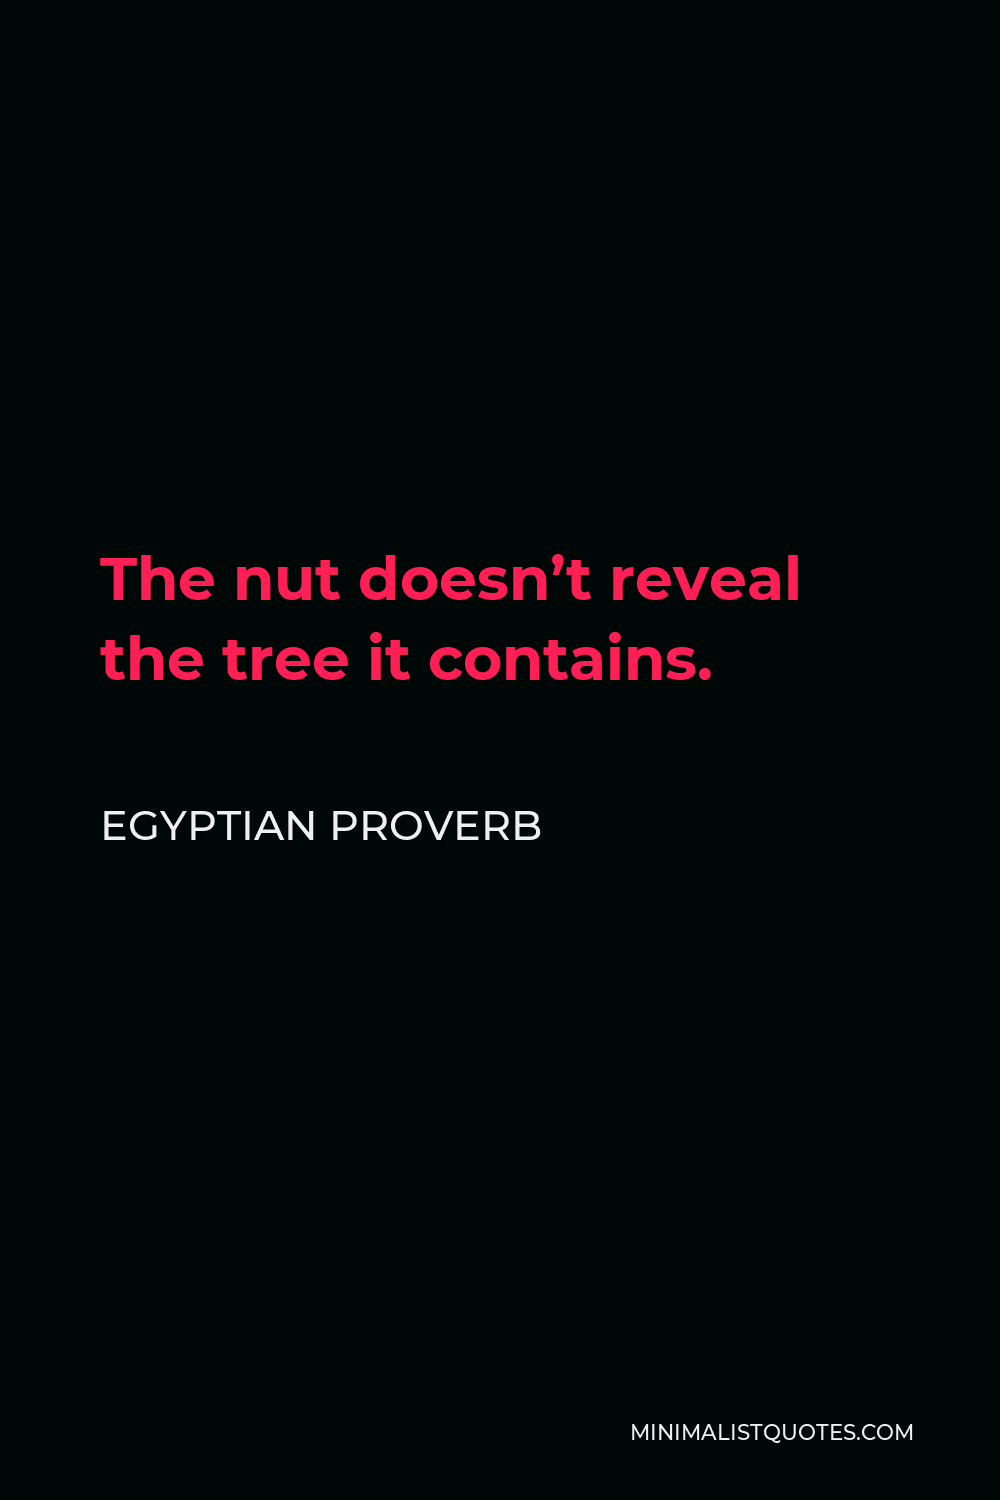 Egyptian Proverb Quote - The nut doesn’t reveal the tree it contains.